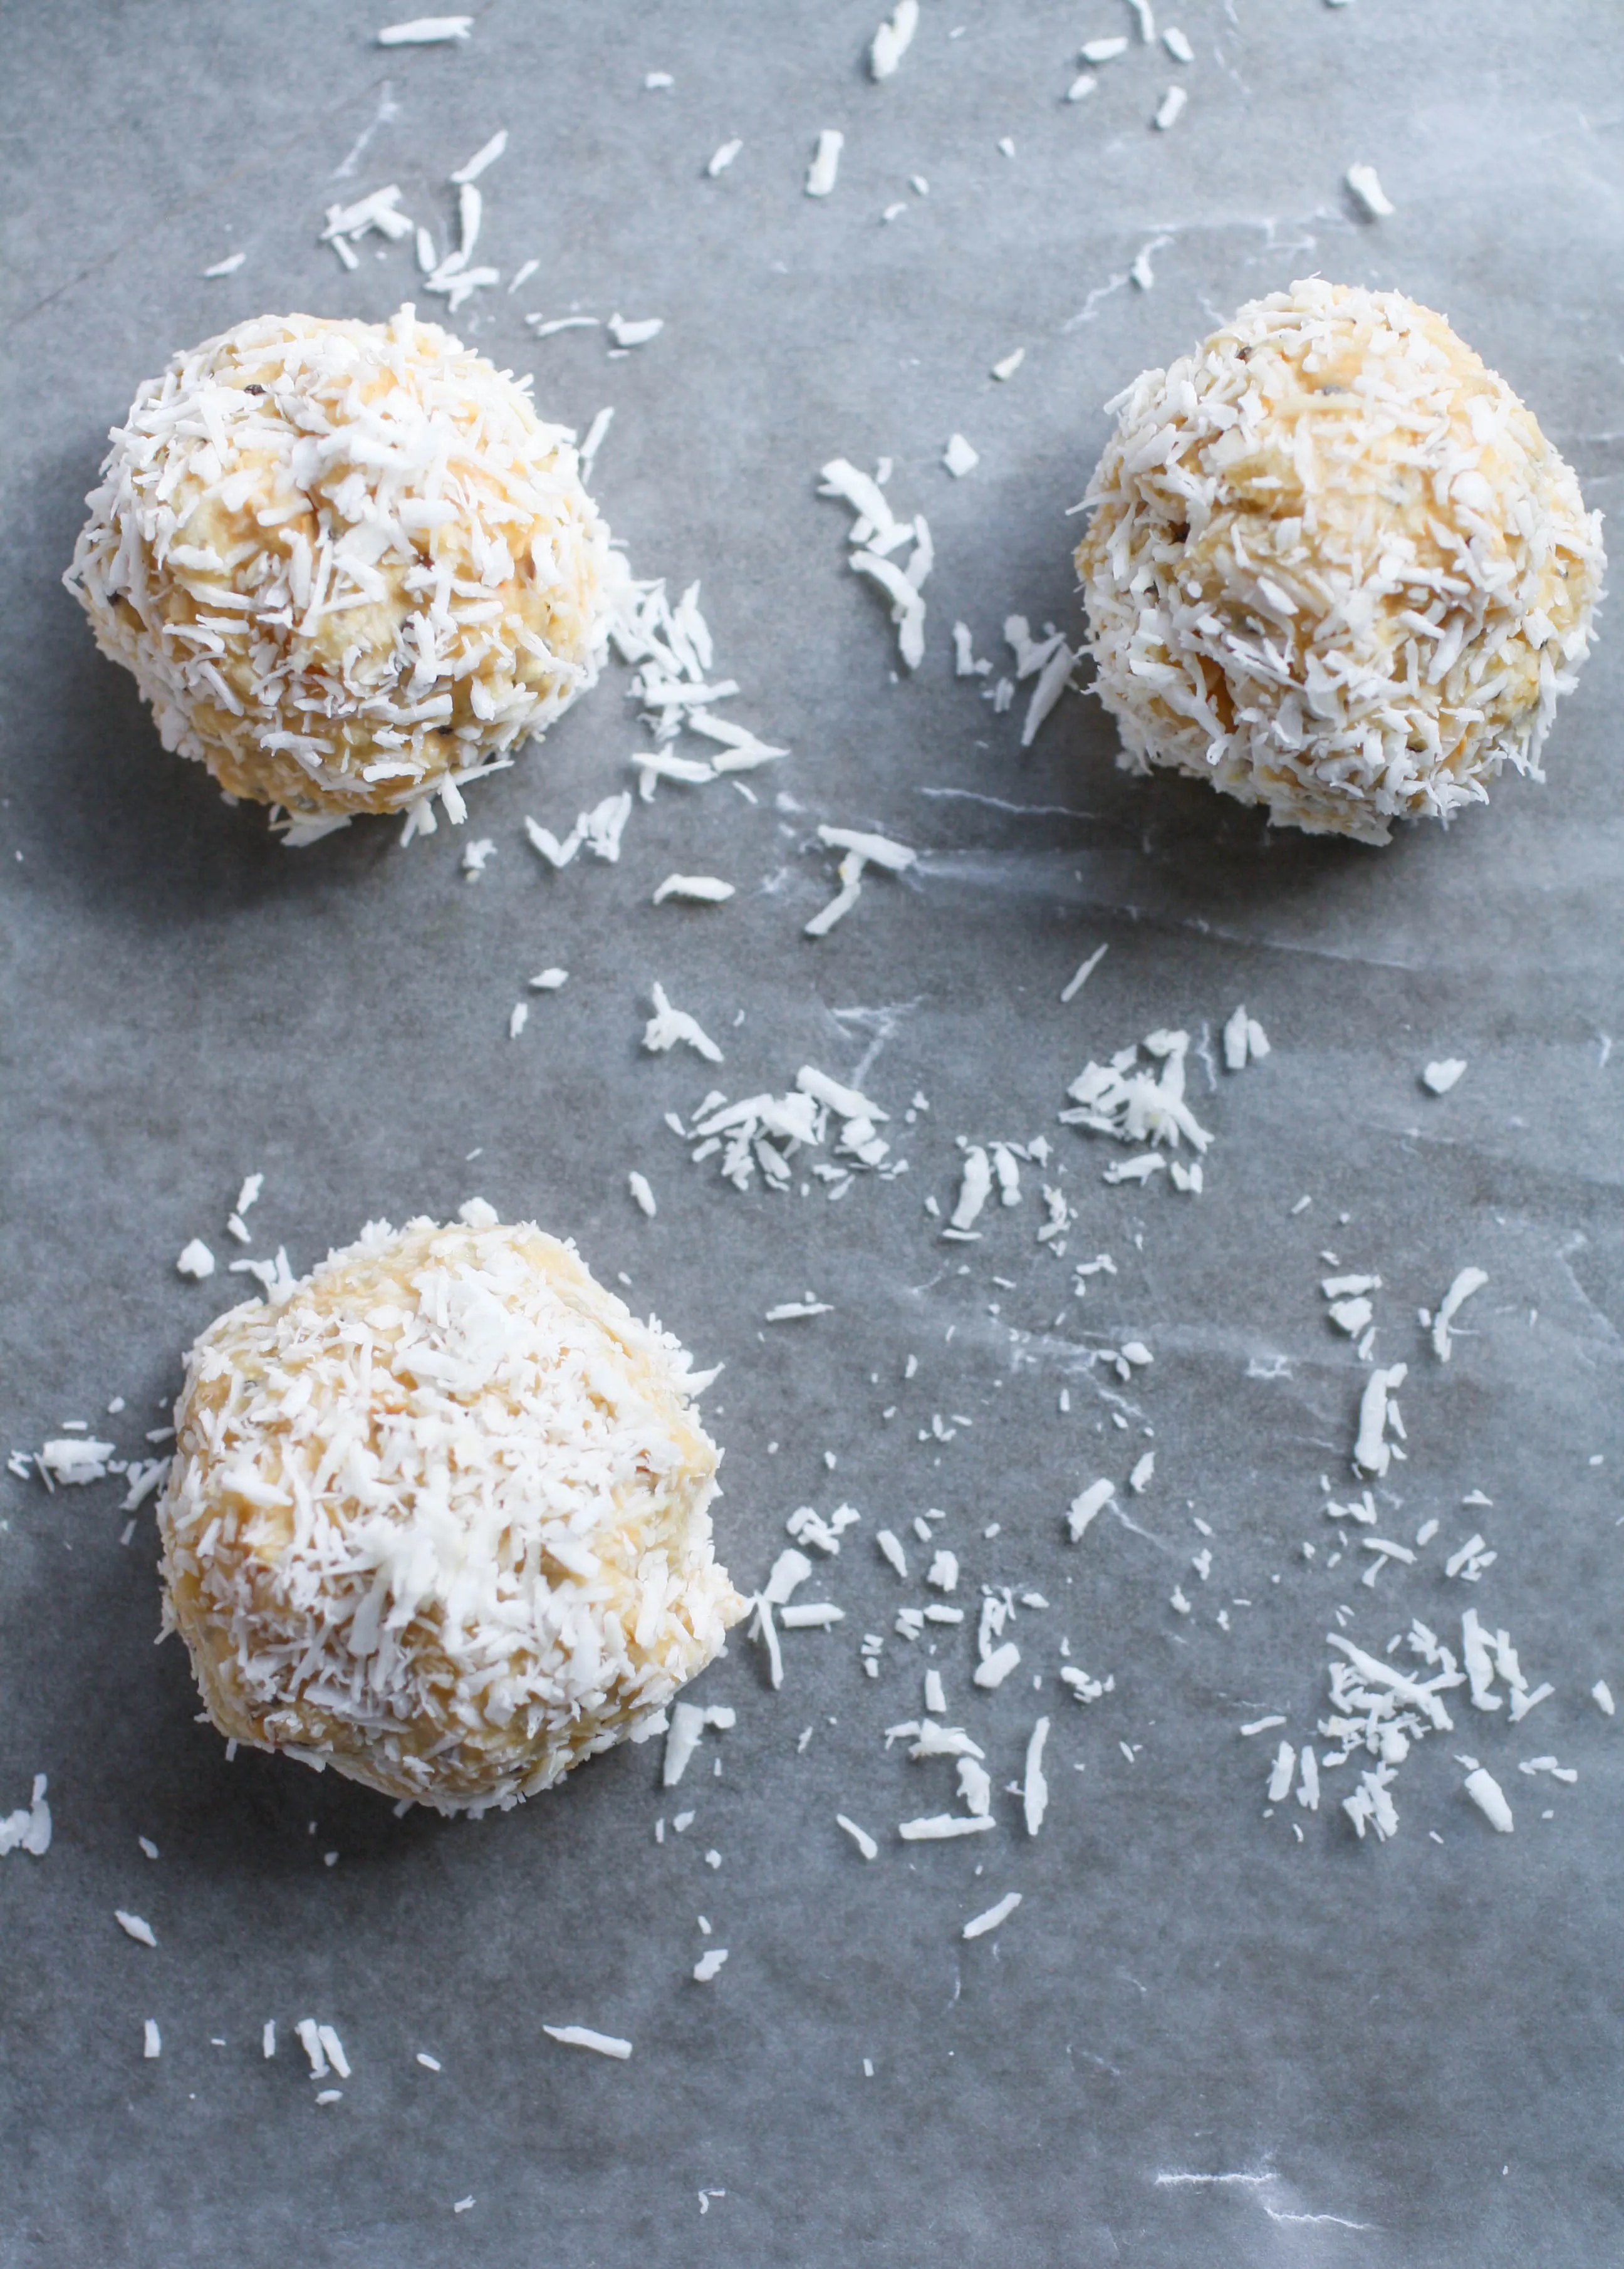 No bake coconut, cashew, and pineapple energy bites are a real snack treat! Enjoy these no bake energy bites for a fabulous treat!